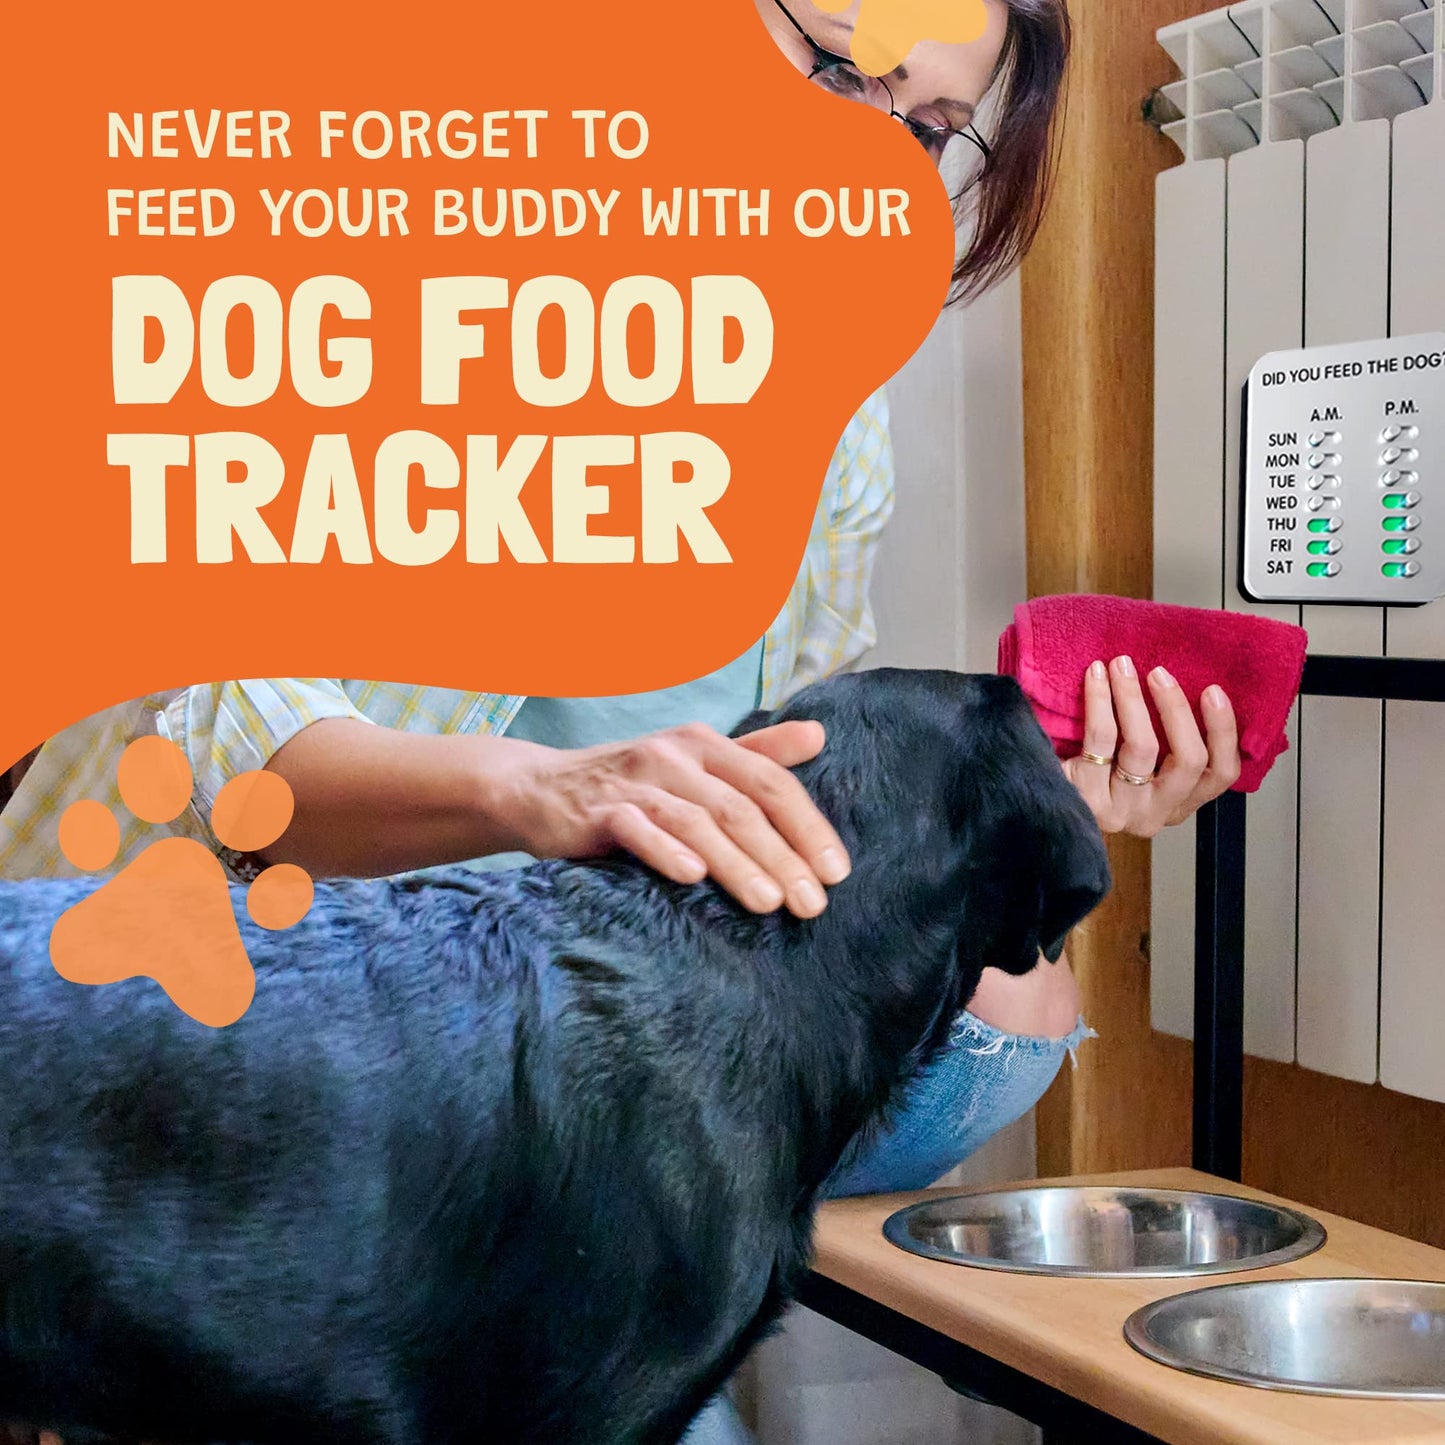 DID You Feed The Dog? Tracker